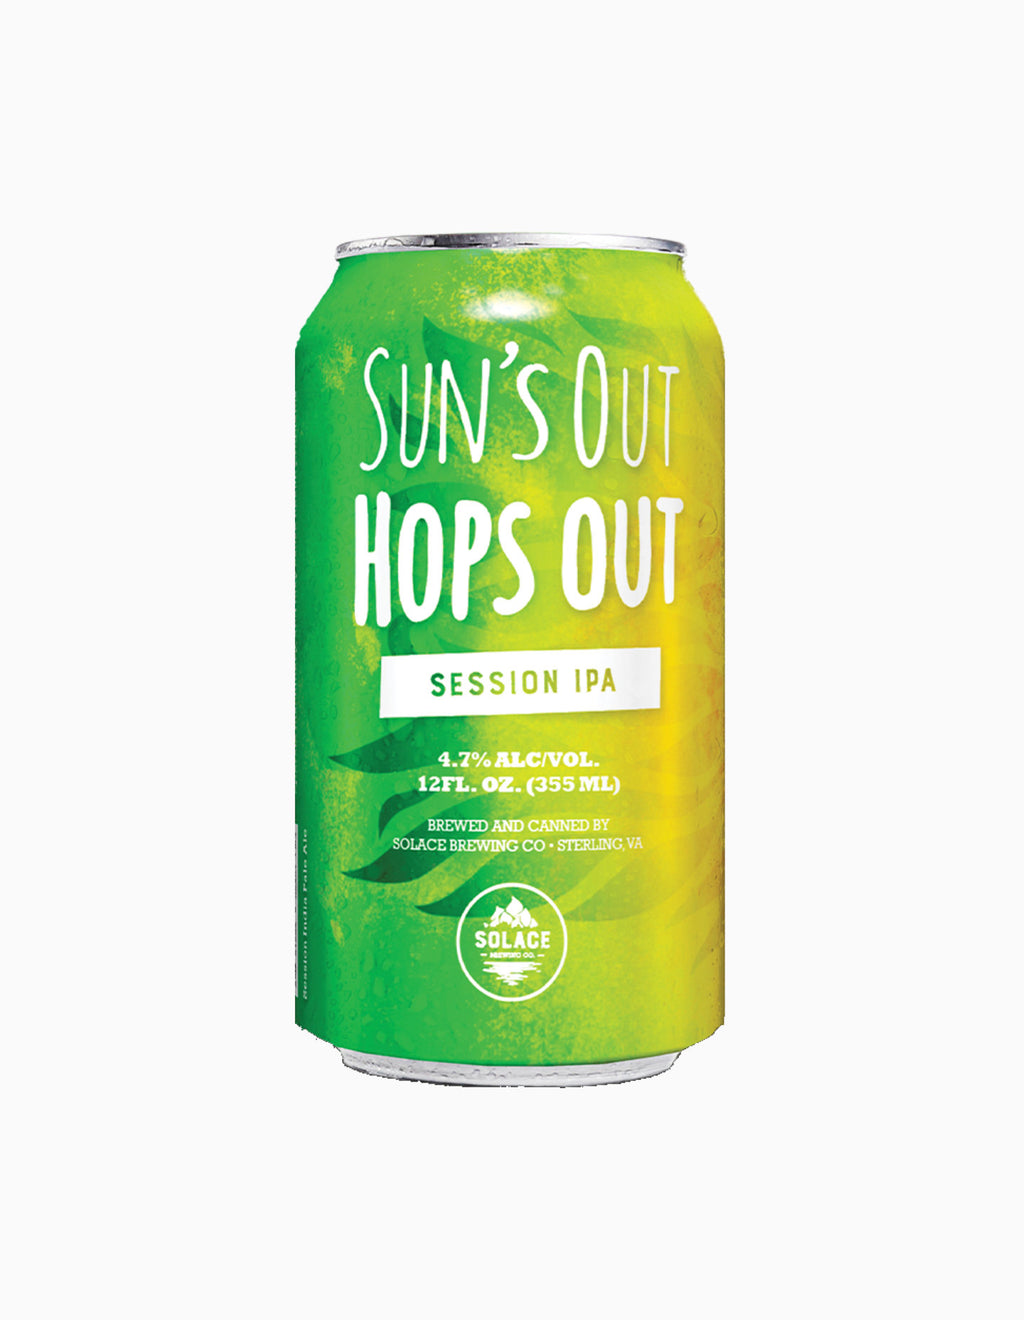 Sun's Out Hops Out